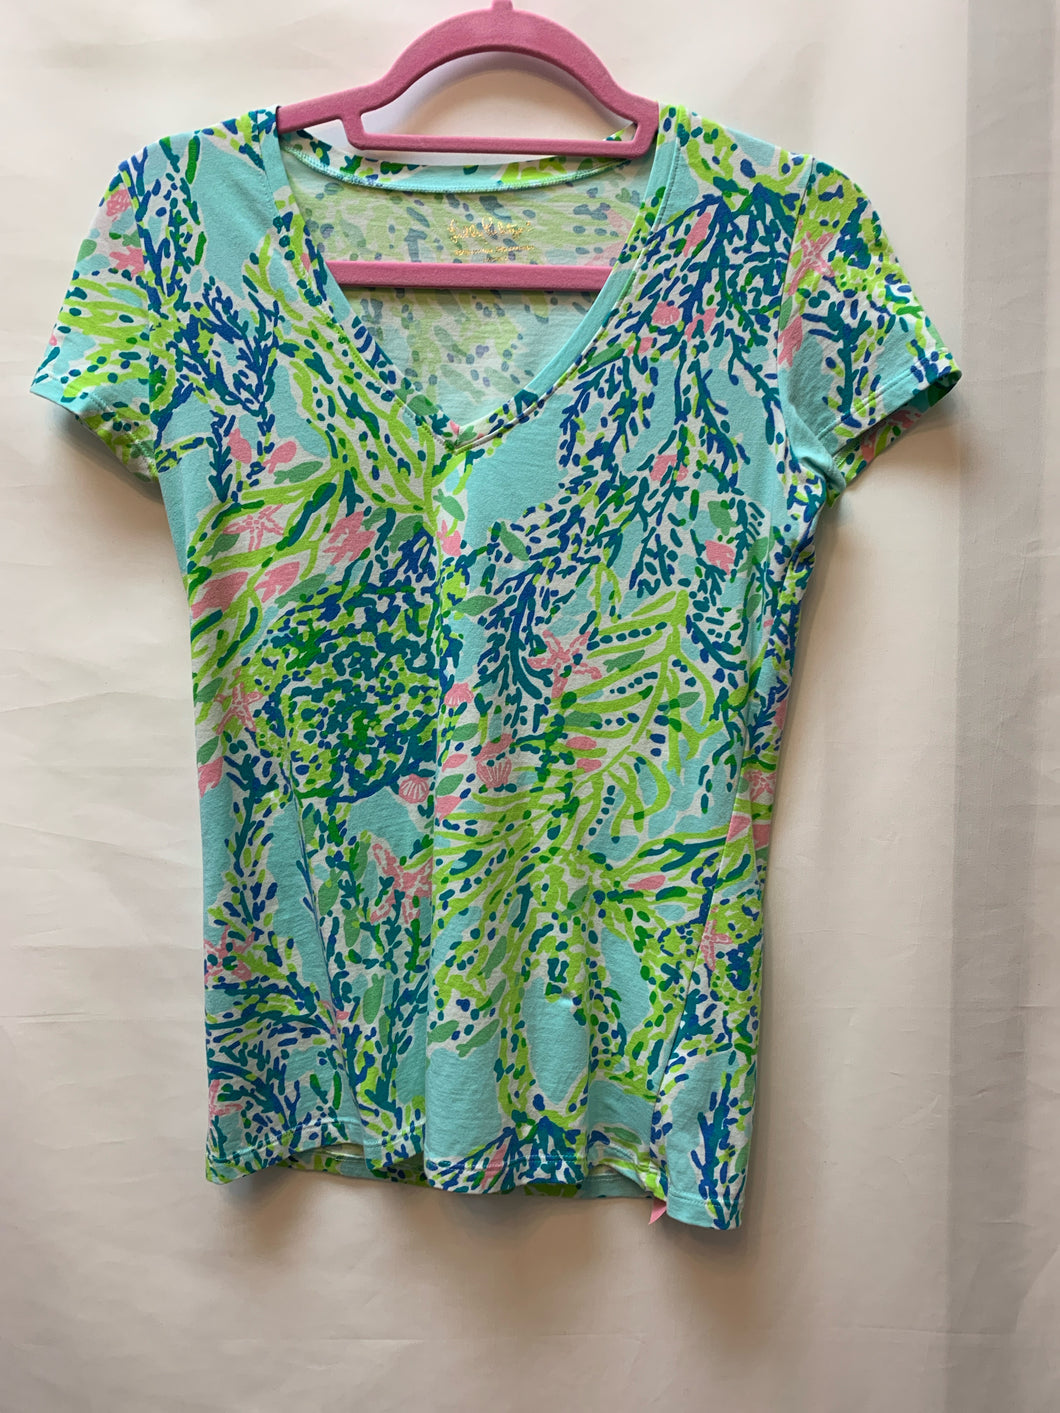 SIZE XS Lilly Pulitzer Tops